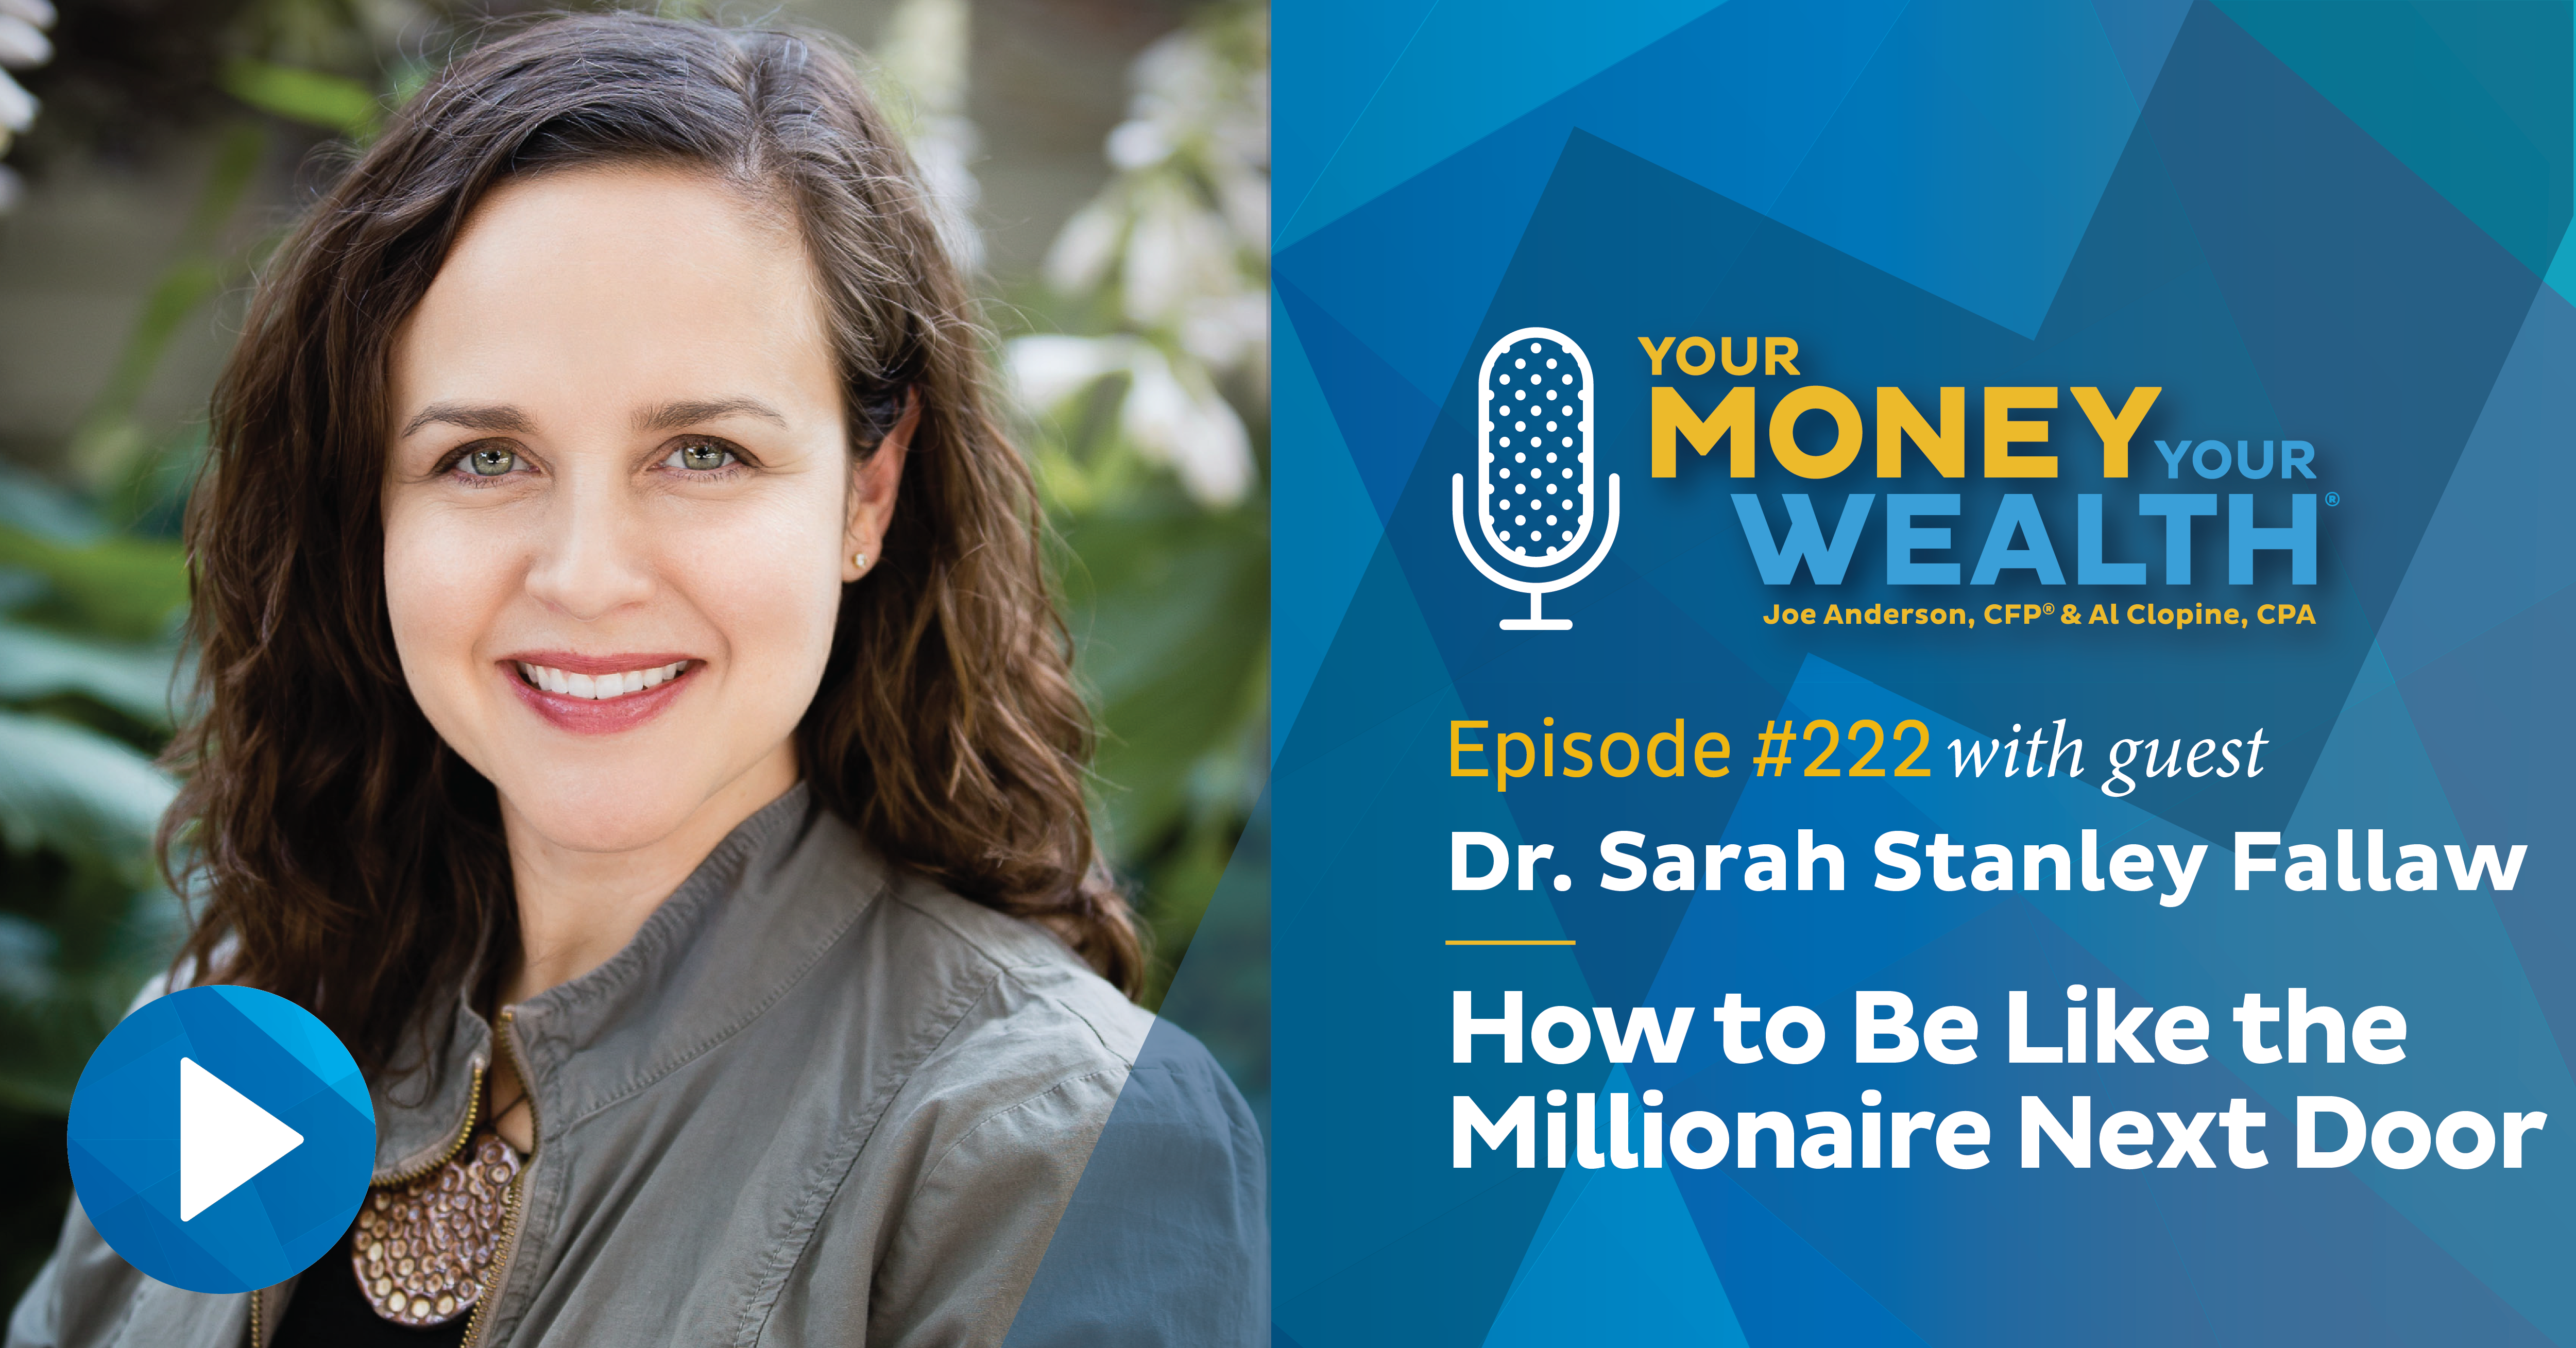 Dr. Sarah Stanley Fallaw: How to Be Like the Millionaire Next Door